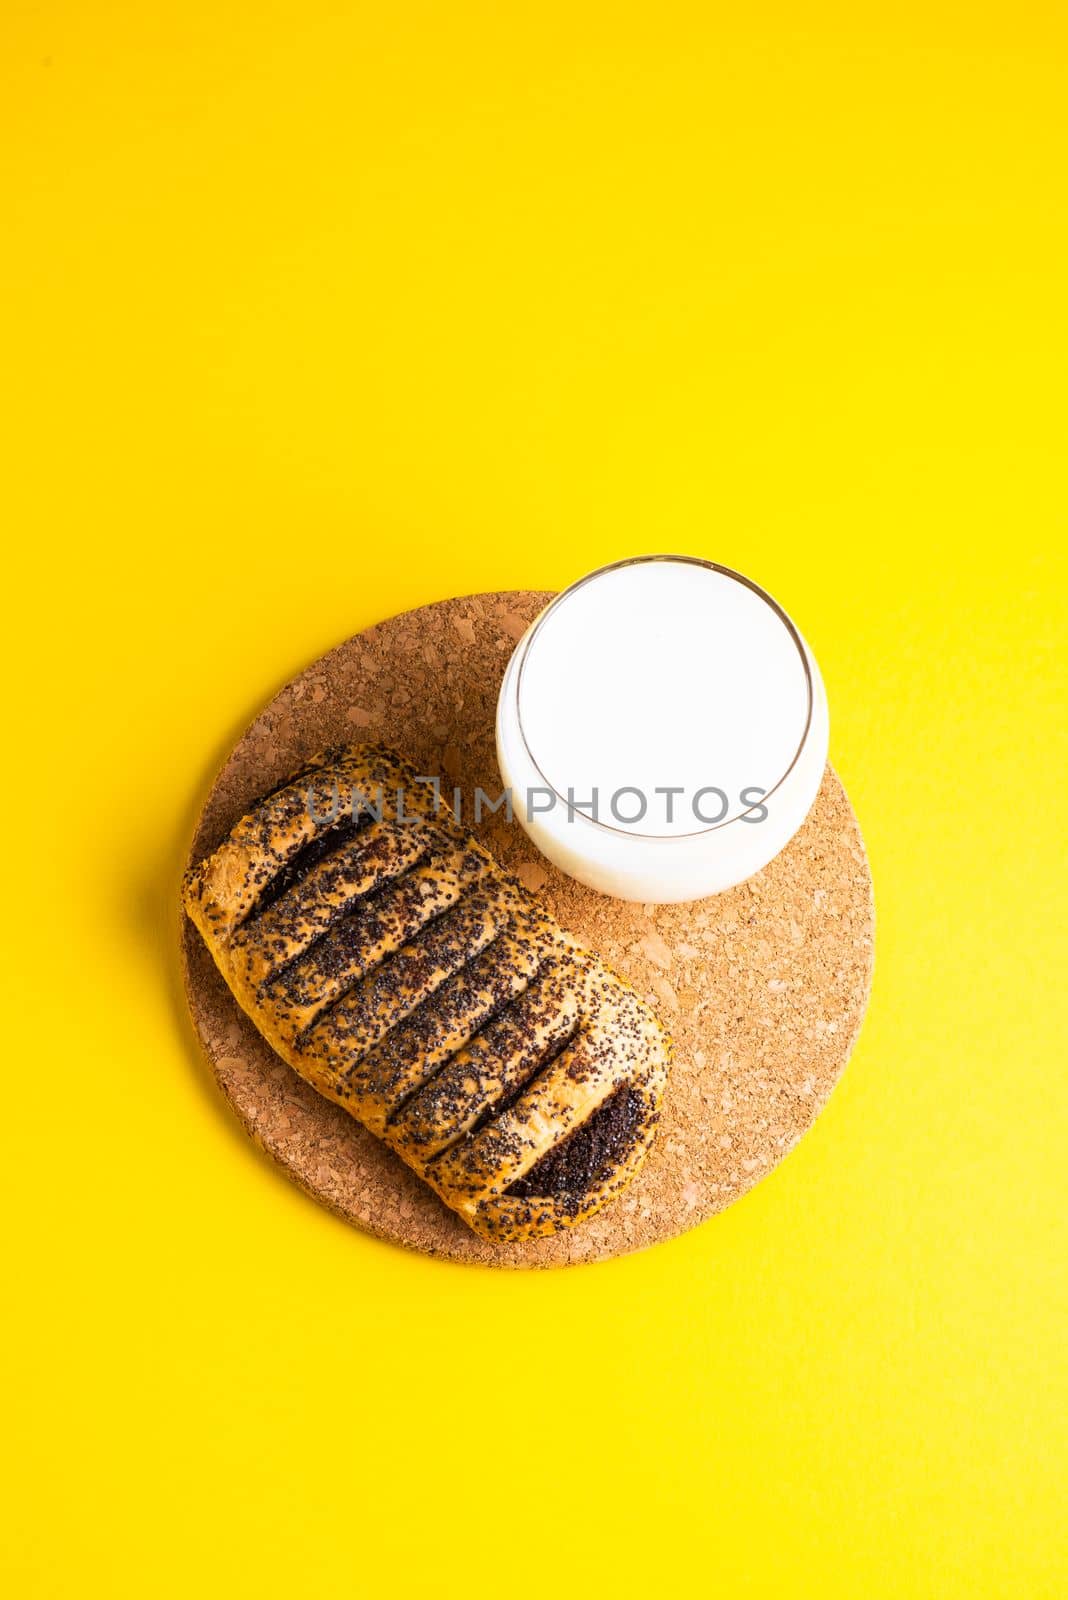 Breakfast bread and a cup of milk on yellow and blue background by Zelenin